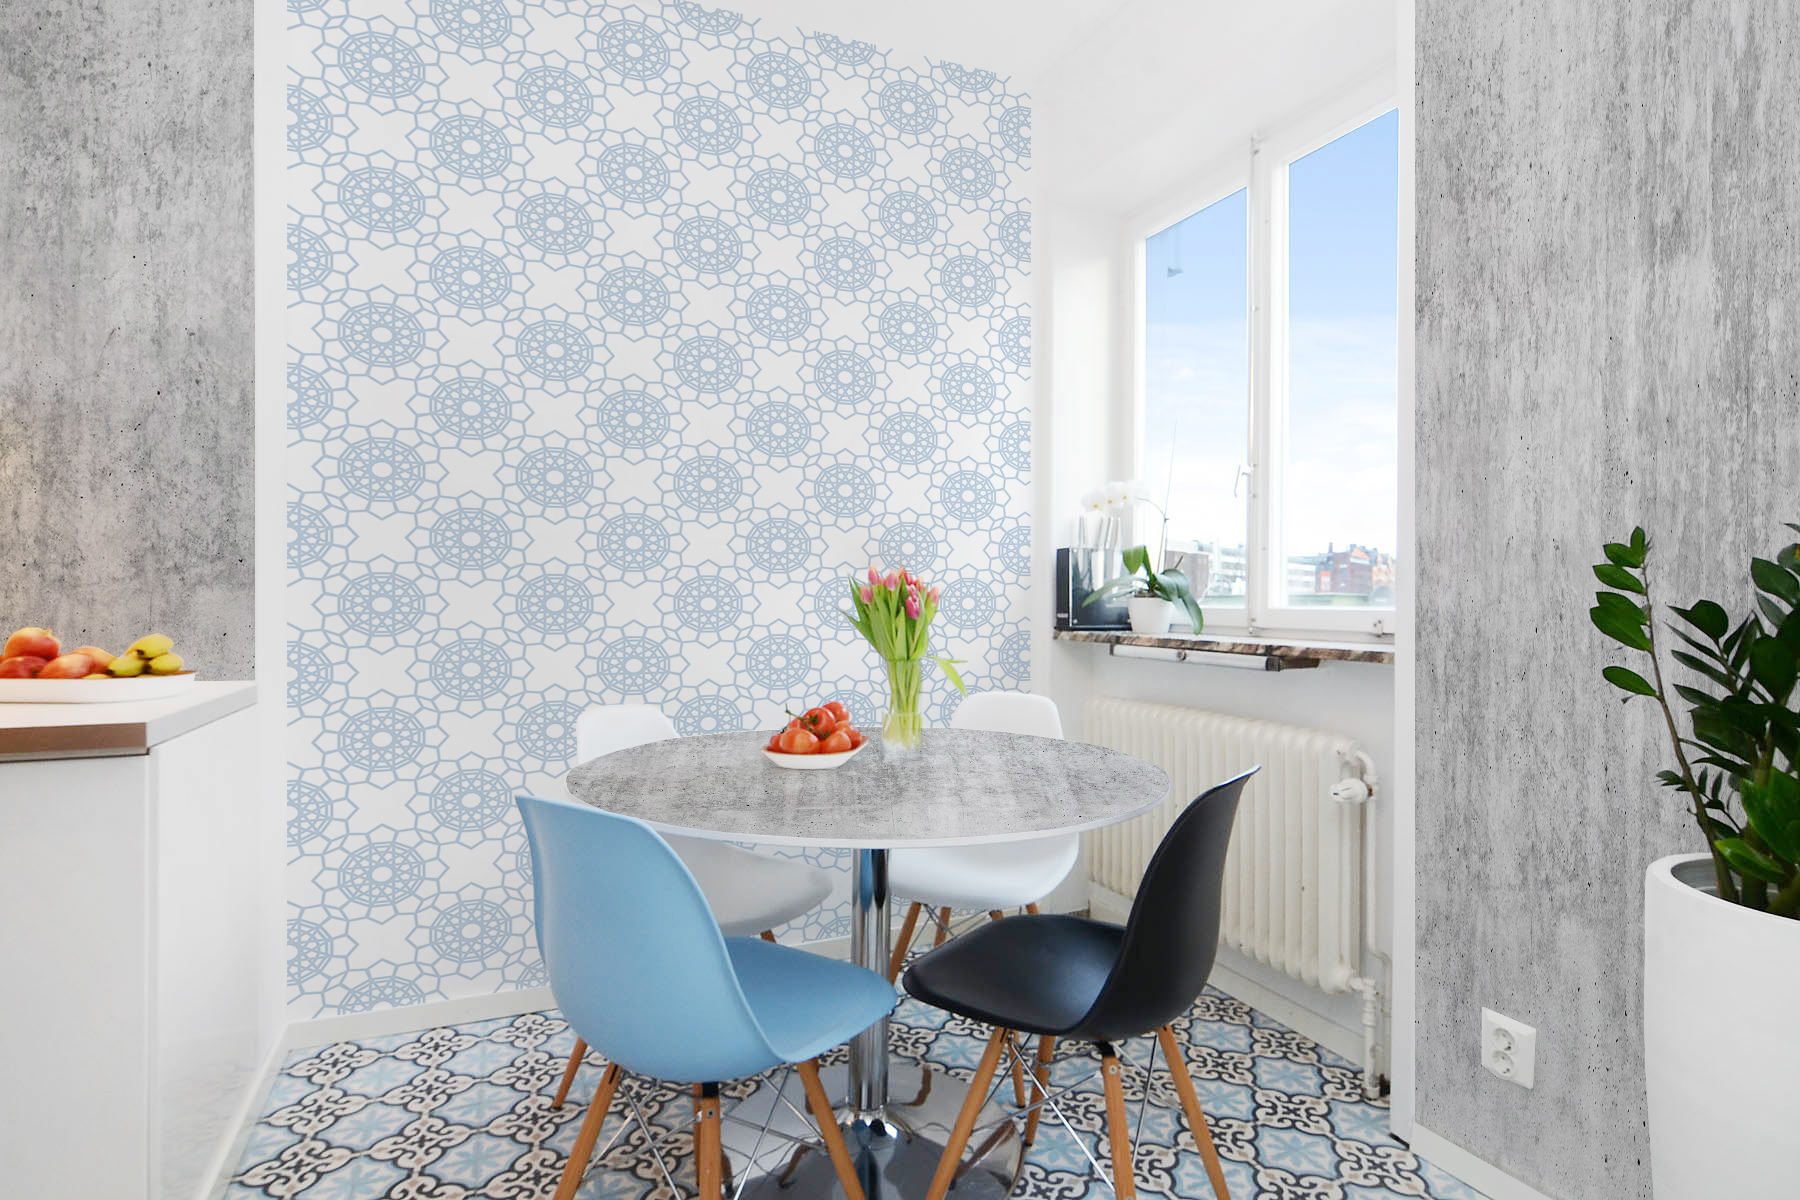 Flower mosaic • Dining room - Kitchen - Contemporary - Textures and patterns - Wall Murals